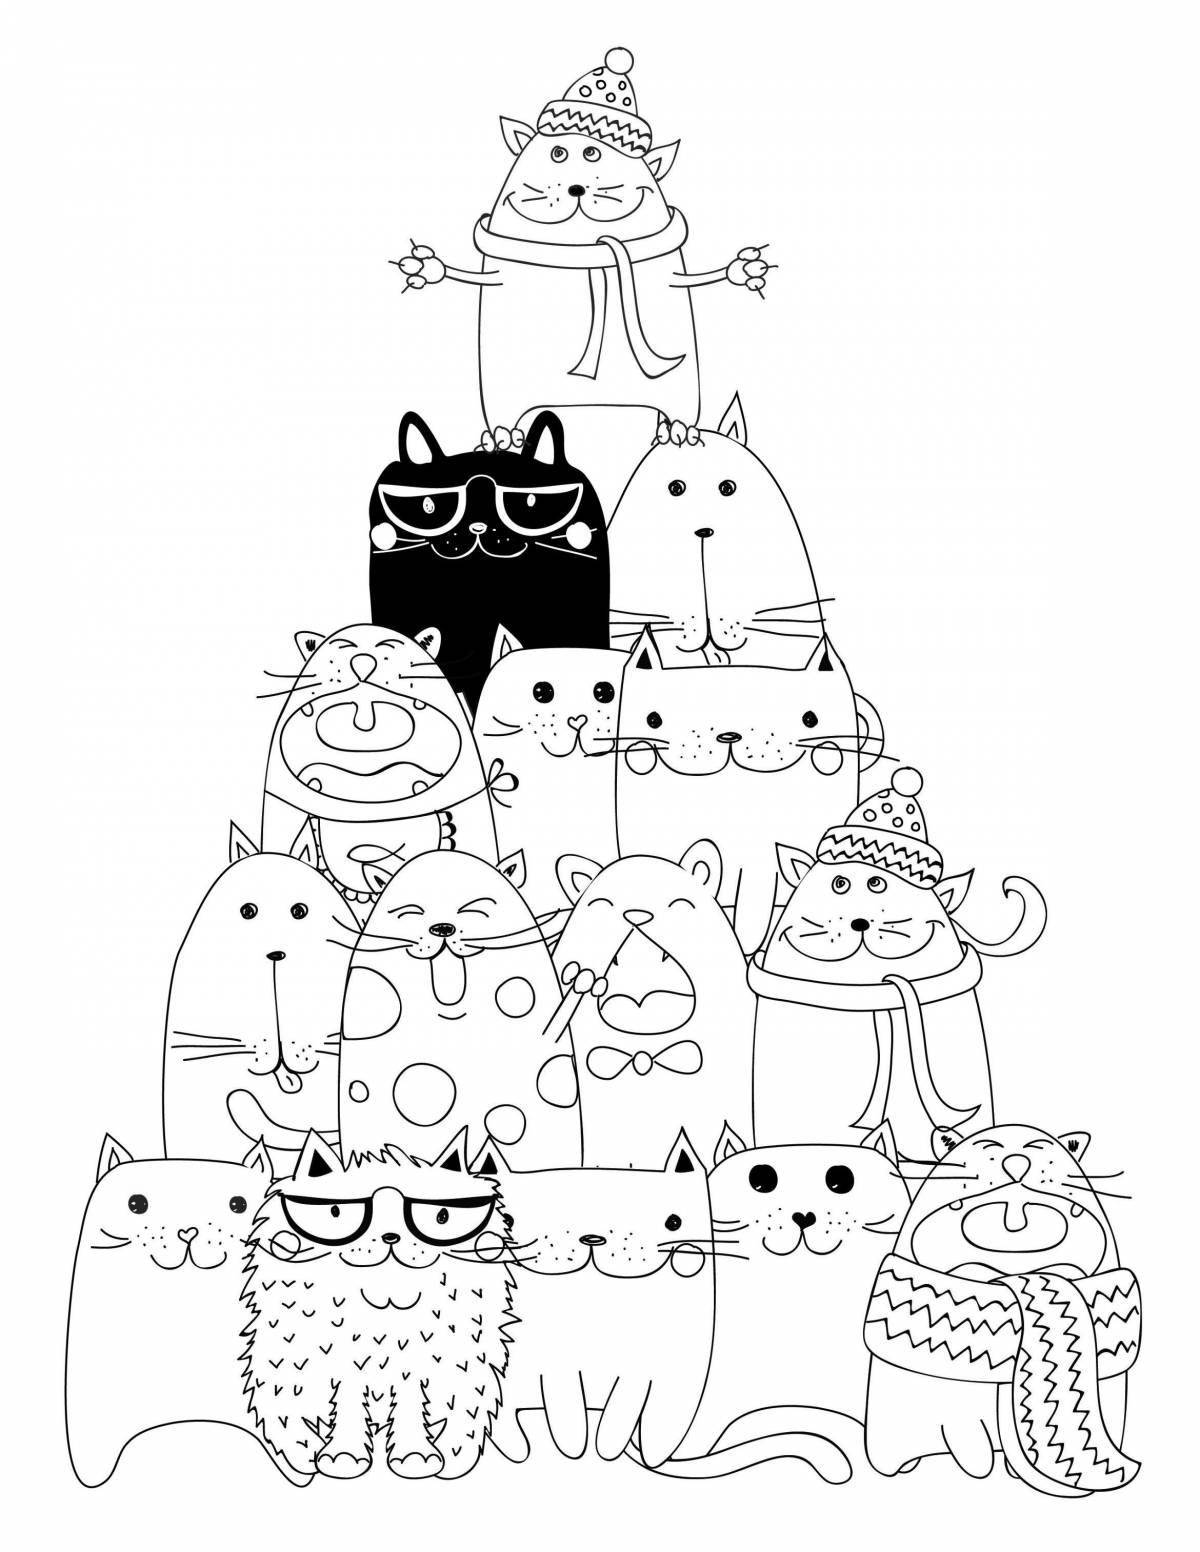 Glorious Million Cats coloring page